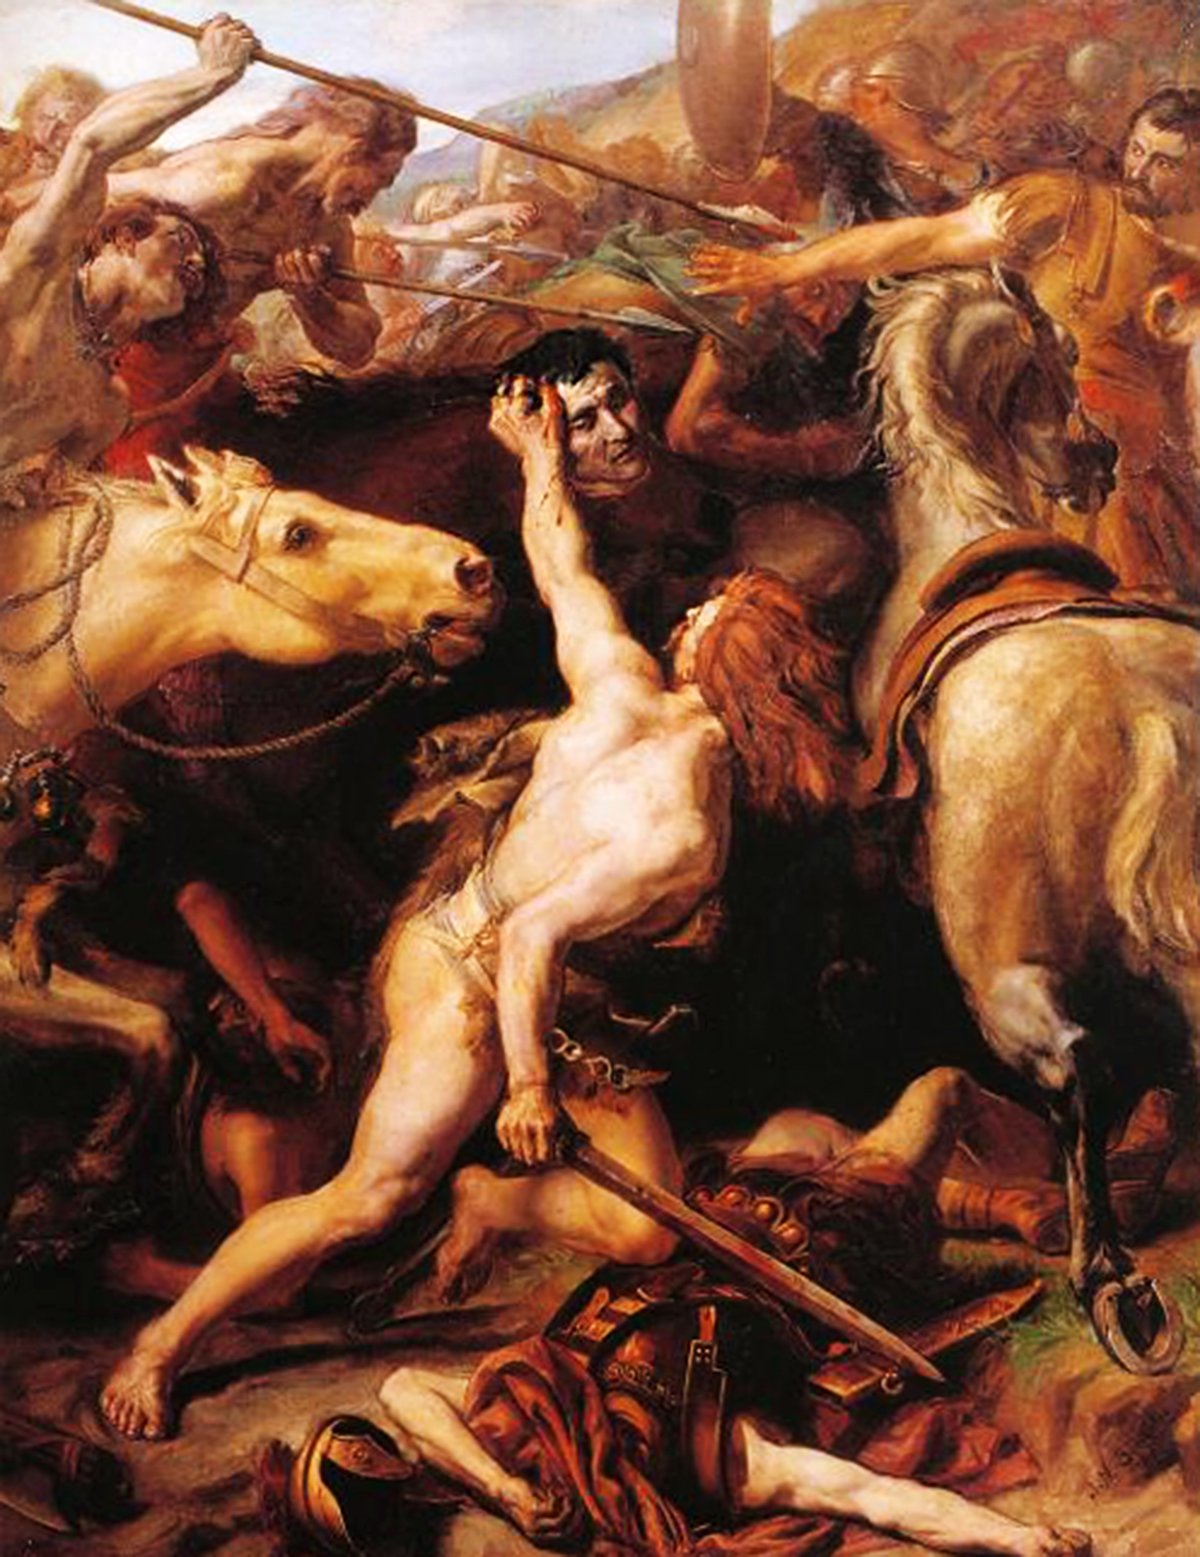 Dramatic painting depicting Ducarius beheading Flaminius during the Battle of Lake Trasimene, surrounded by intense combat, warriors, and rearing horses, with fallen equipment and weapons scattered about.